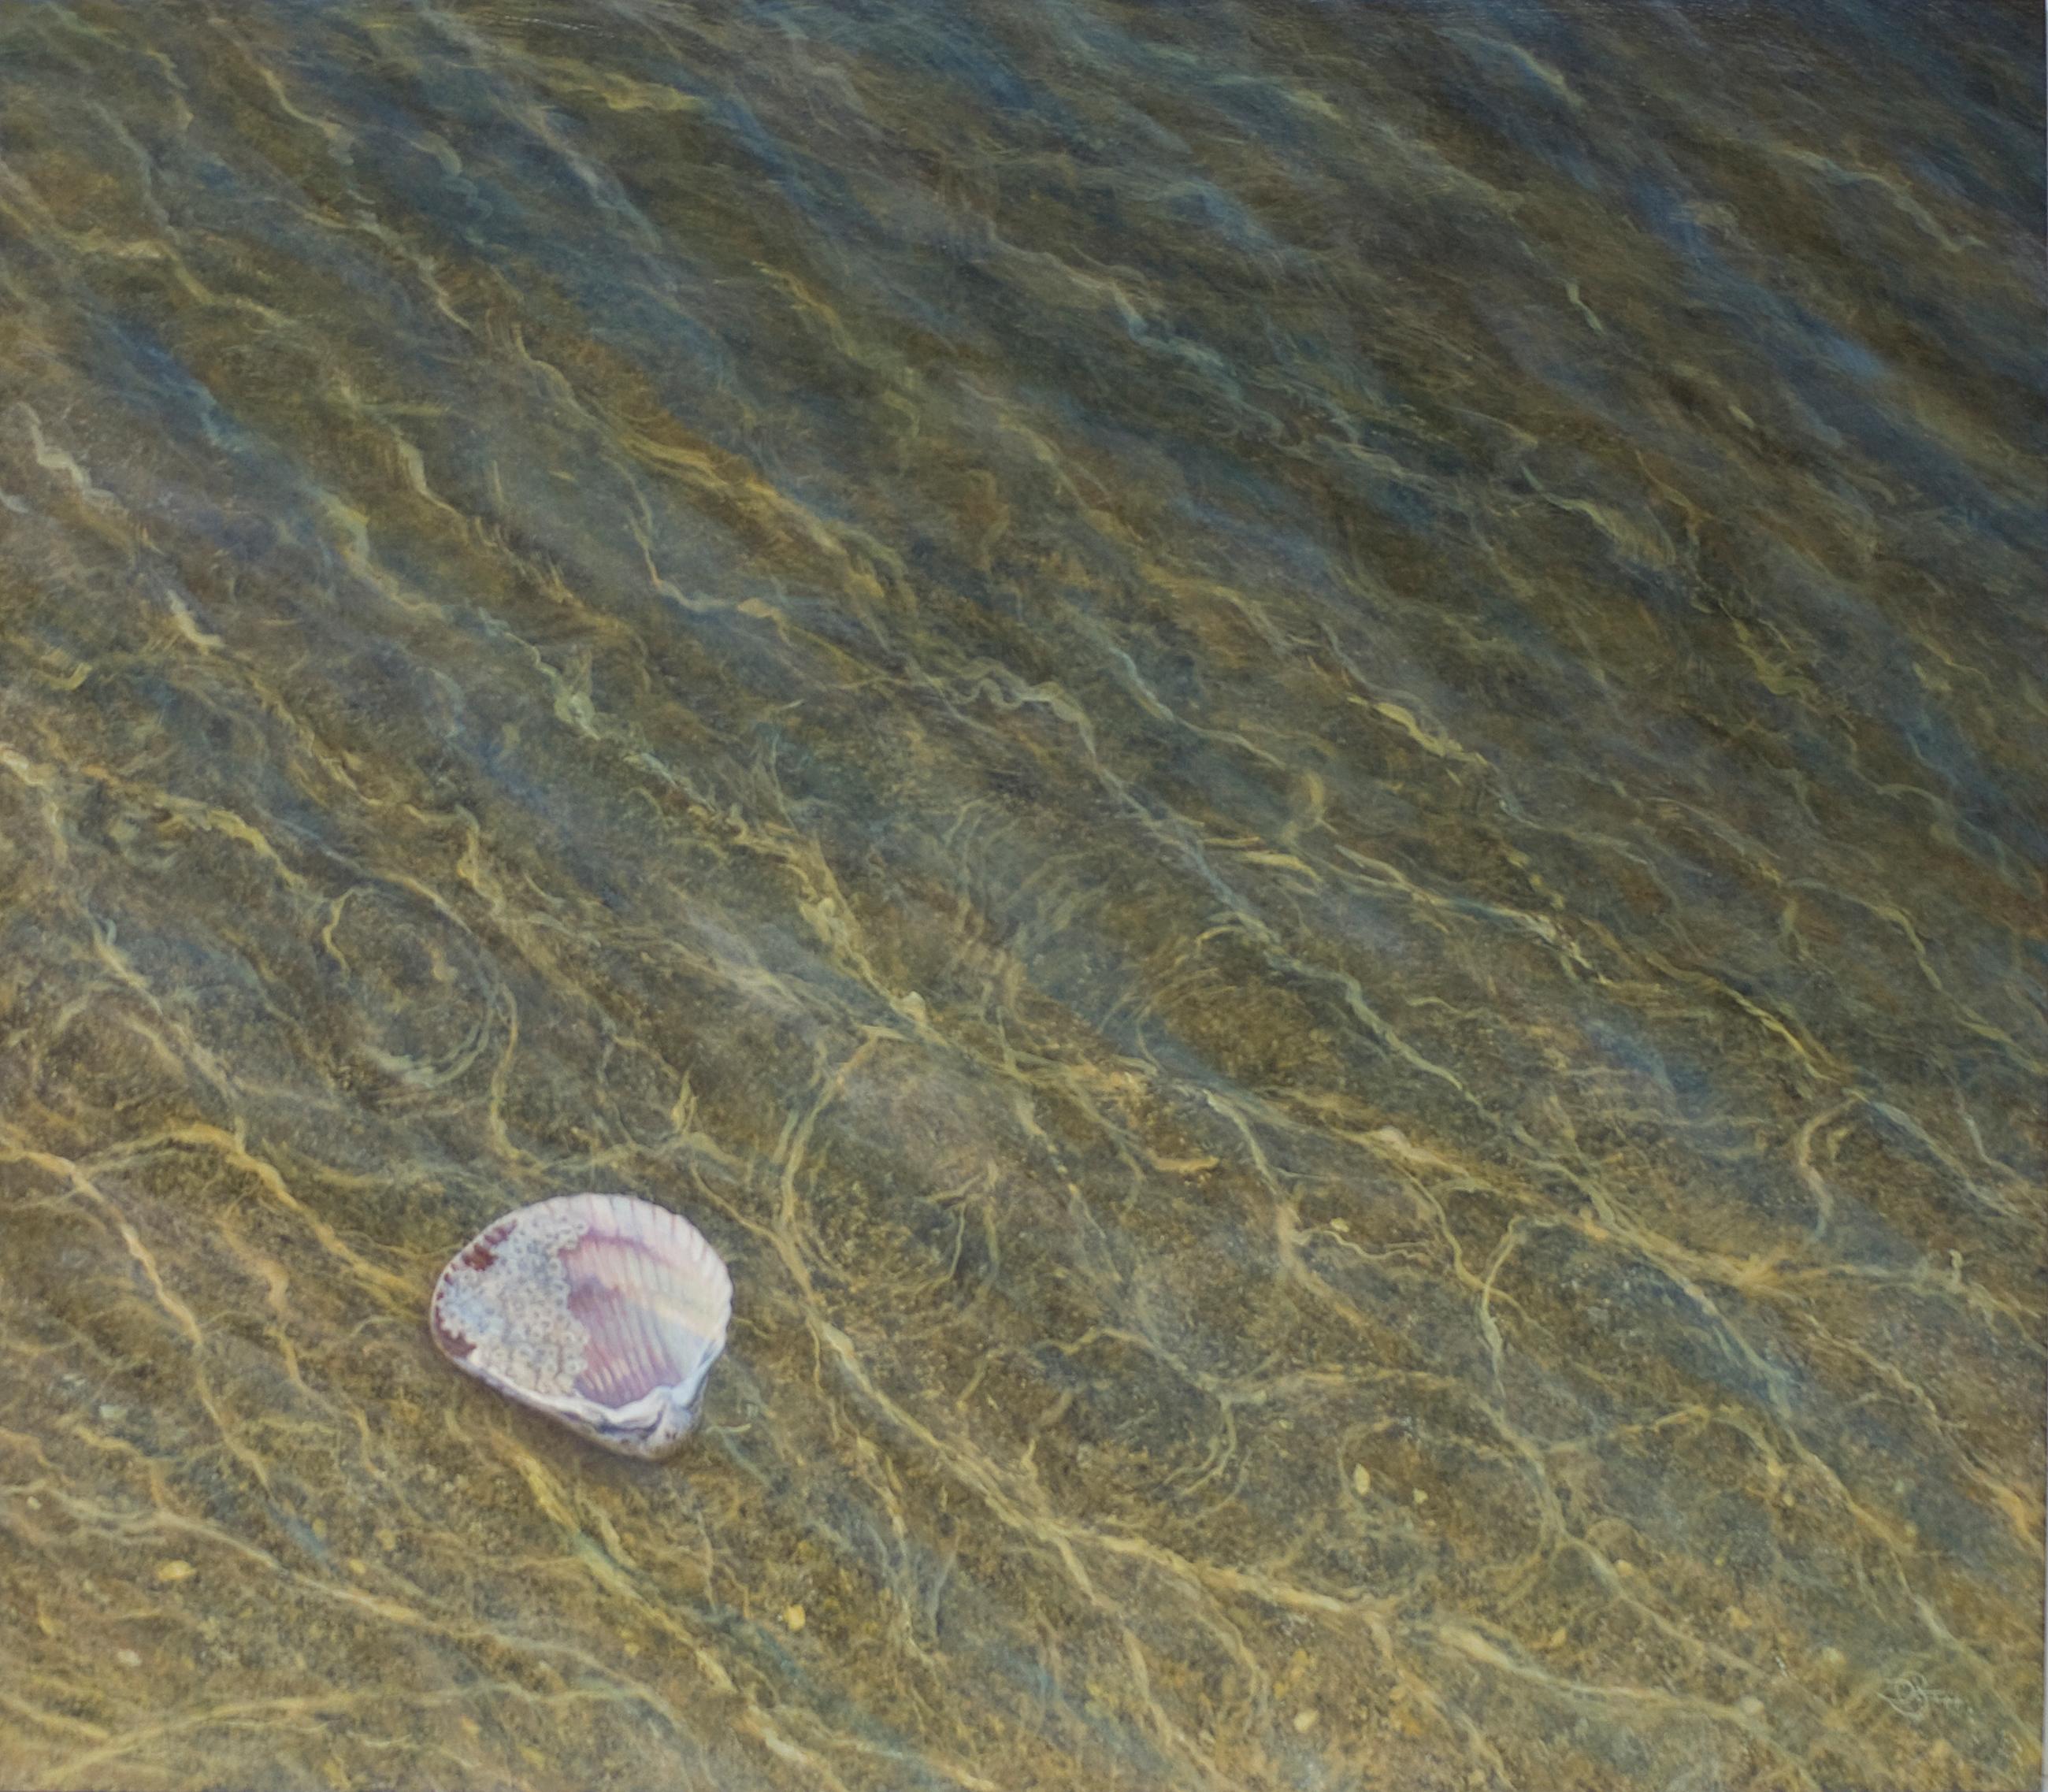 This piece, "Tidal Treasure", is a 21x24 acrylic painting on board by artist Del Bourree Bach featuring a view over a solitary body of clear ocean water. A solitary seashell sits among the sparkling golden light reflections of the lonely water